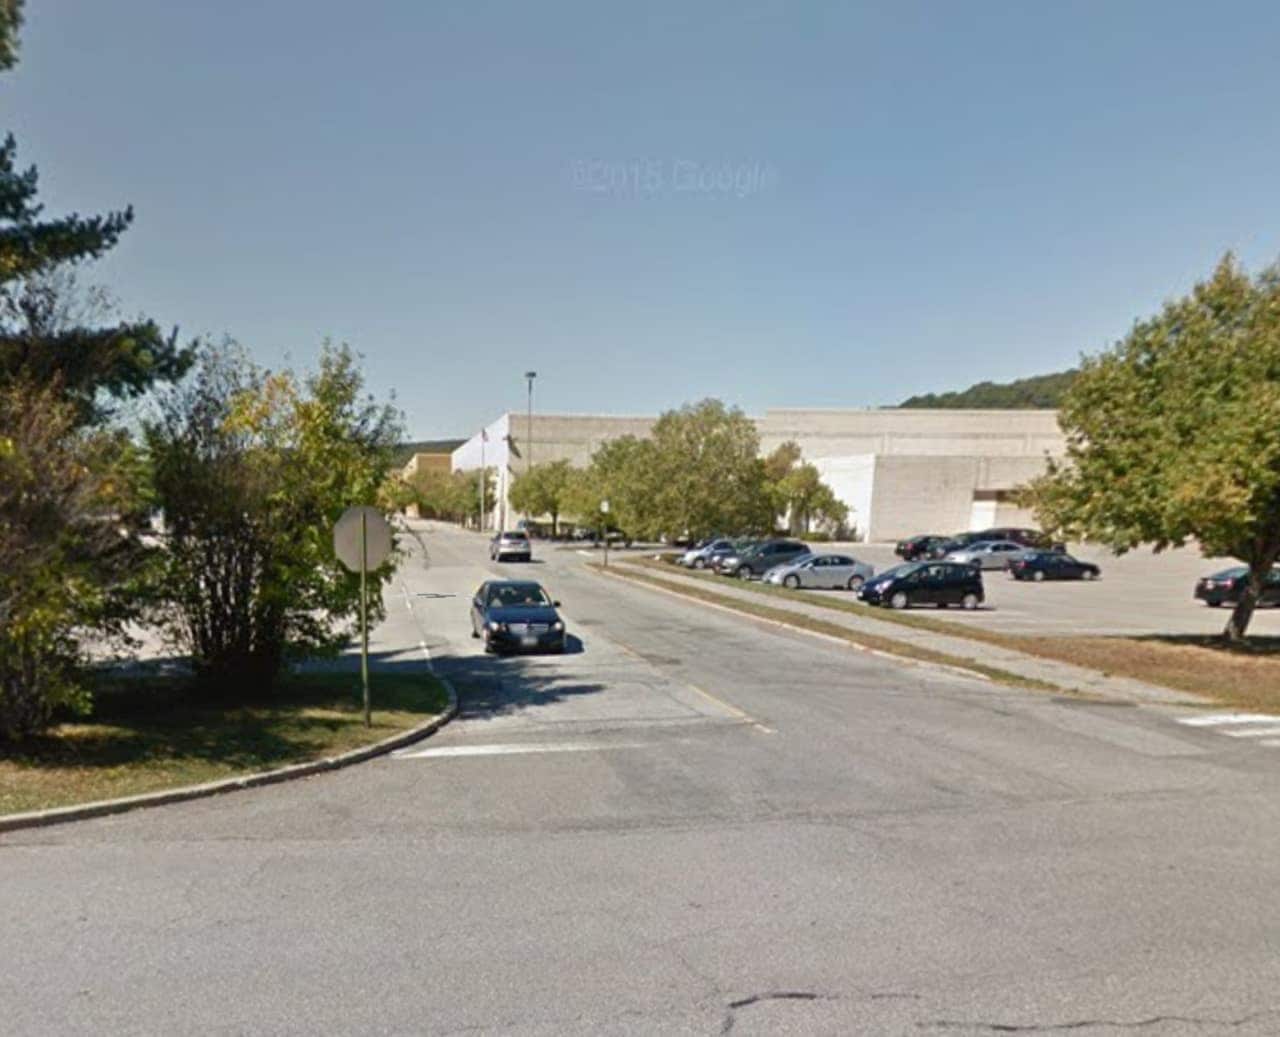 Yorktown police arrested a 37-year-old Ossining woman Thursday after Sears employees said she tried to leave the store without paying for clothes valued at $265, police said.